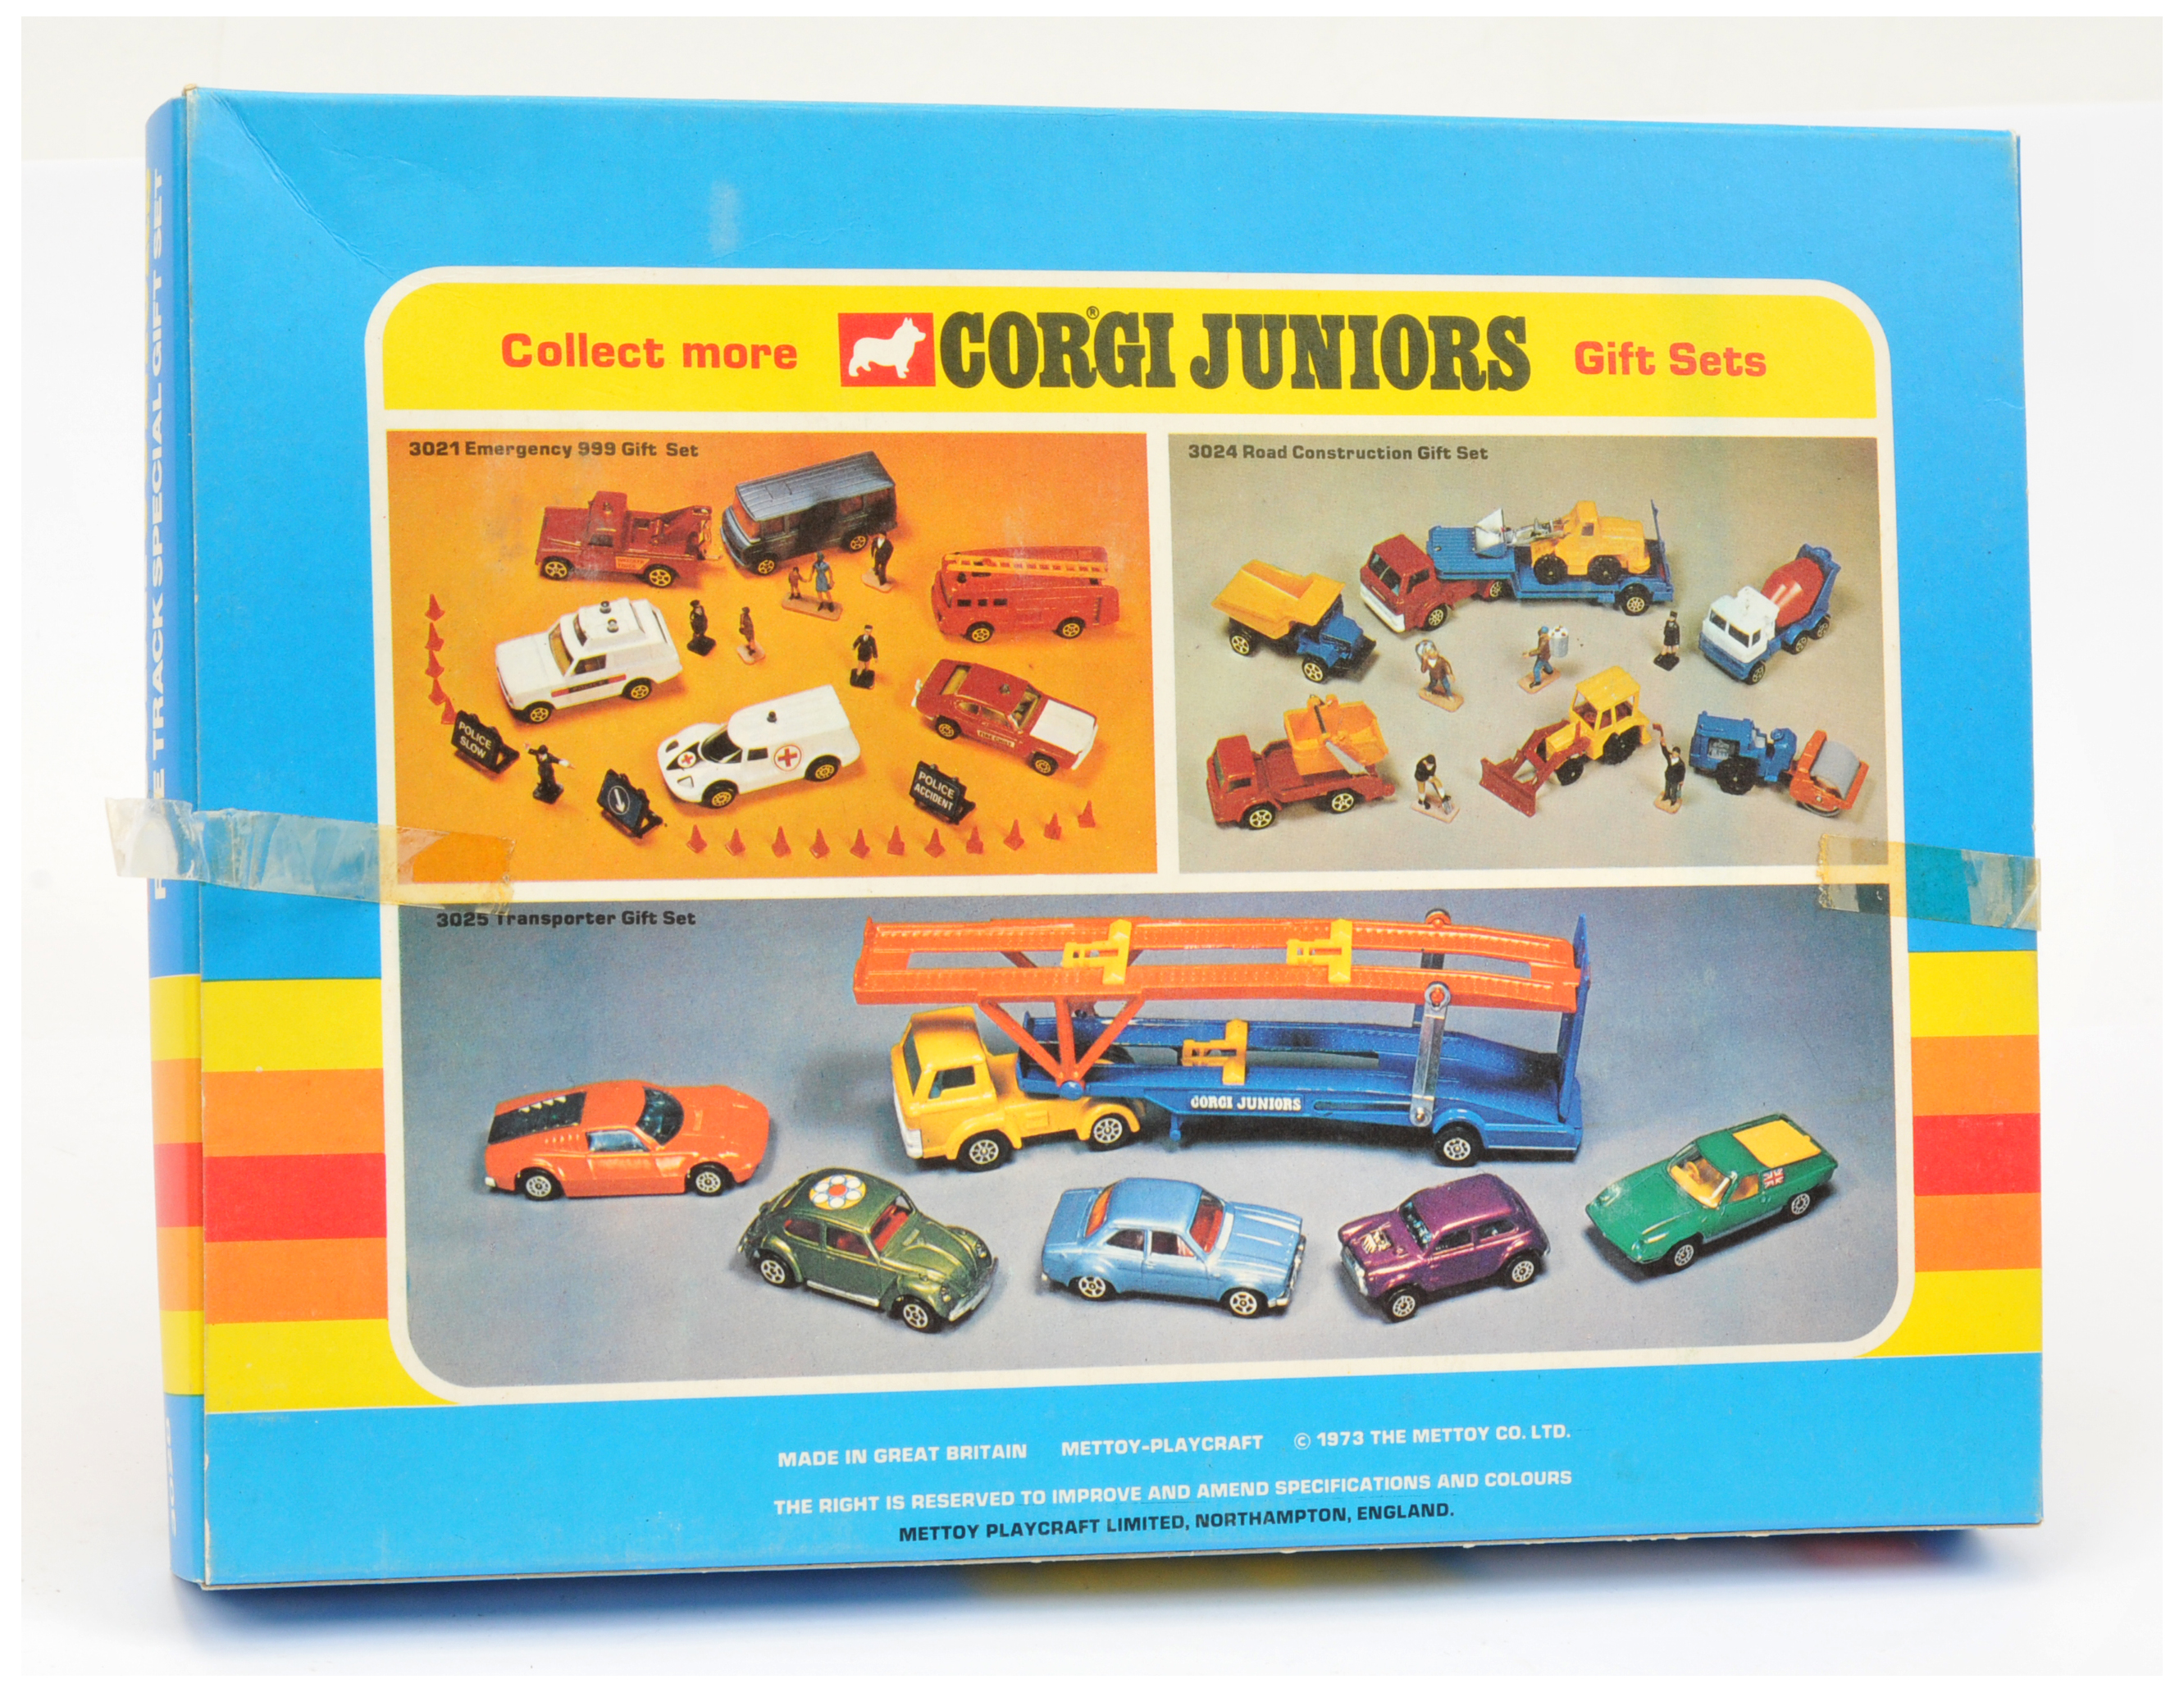 Corgi Toys Juniors 3028 "Race track Special"  Gift Set To Include 7 Pieces - Range Rover "Crash T... - Image 2 of 2